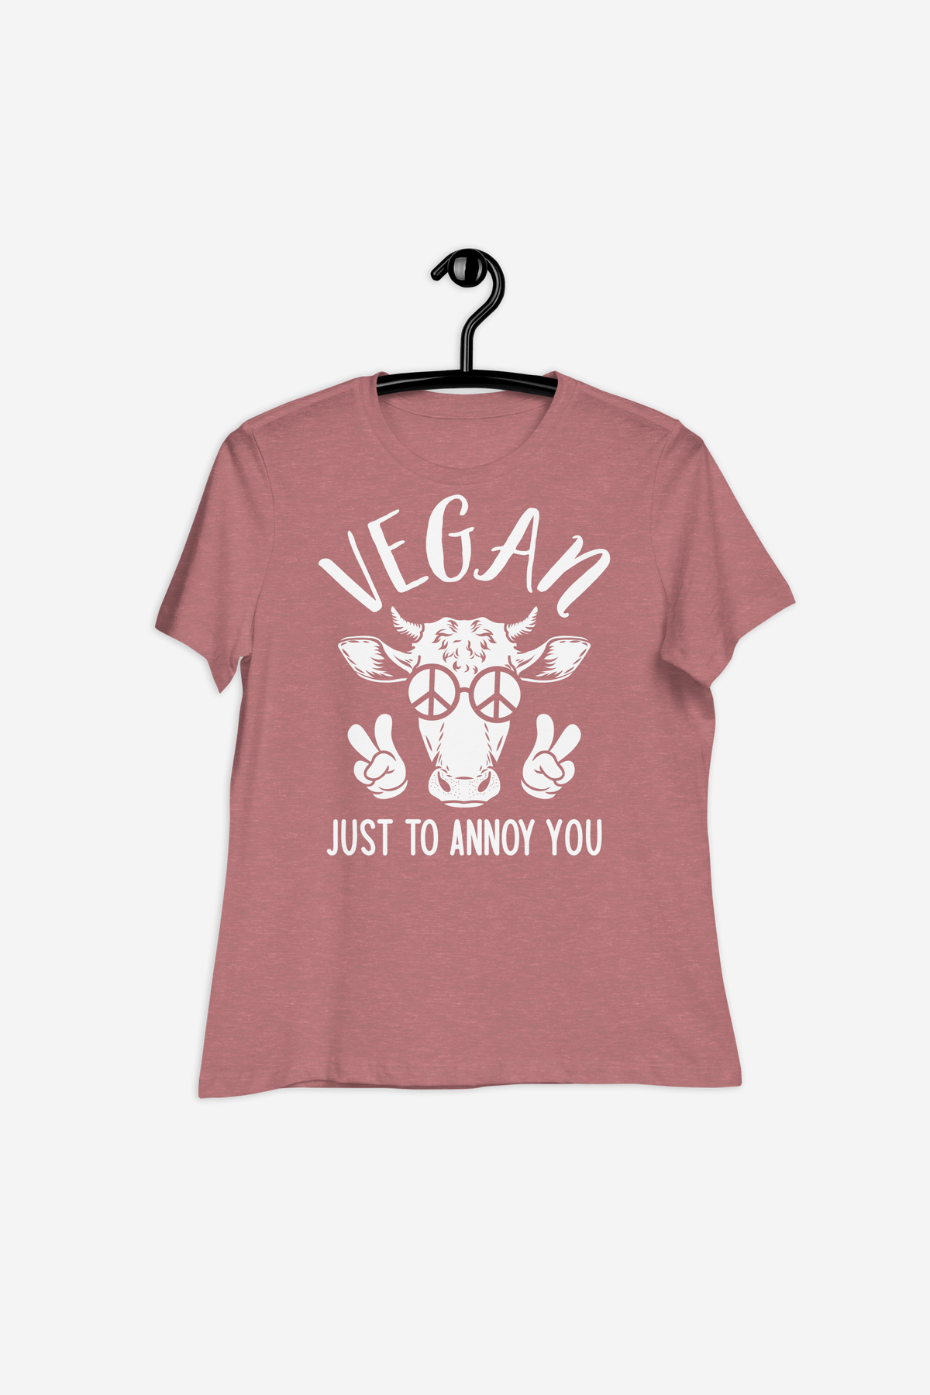 Just To Annoy You Women's Relaxed T-Shirt